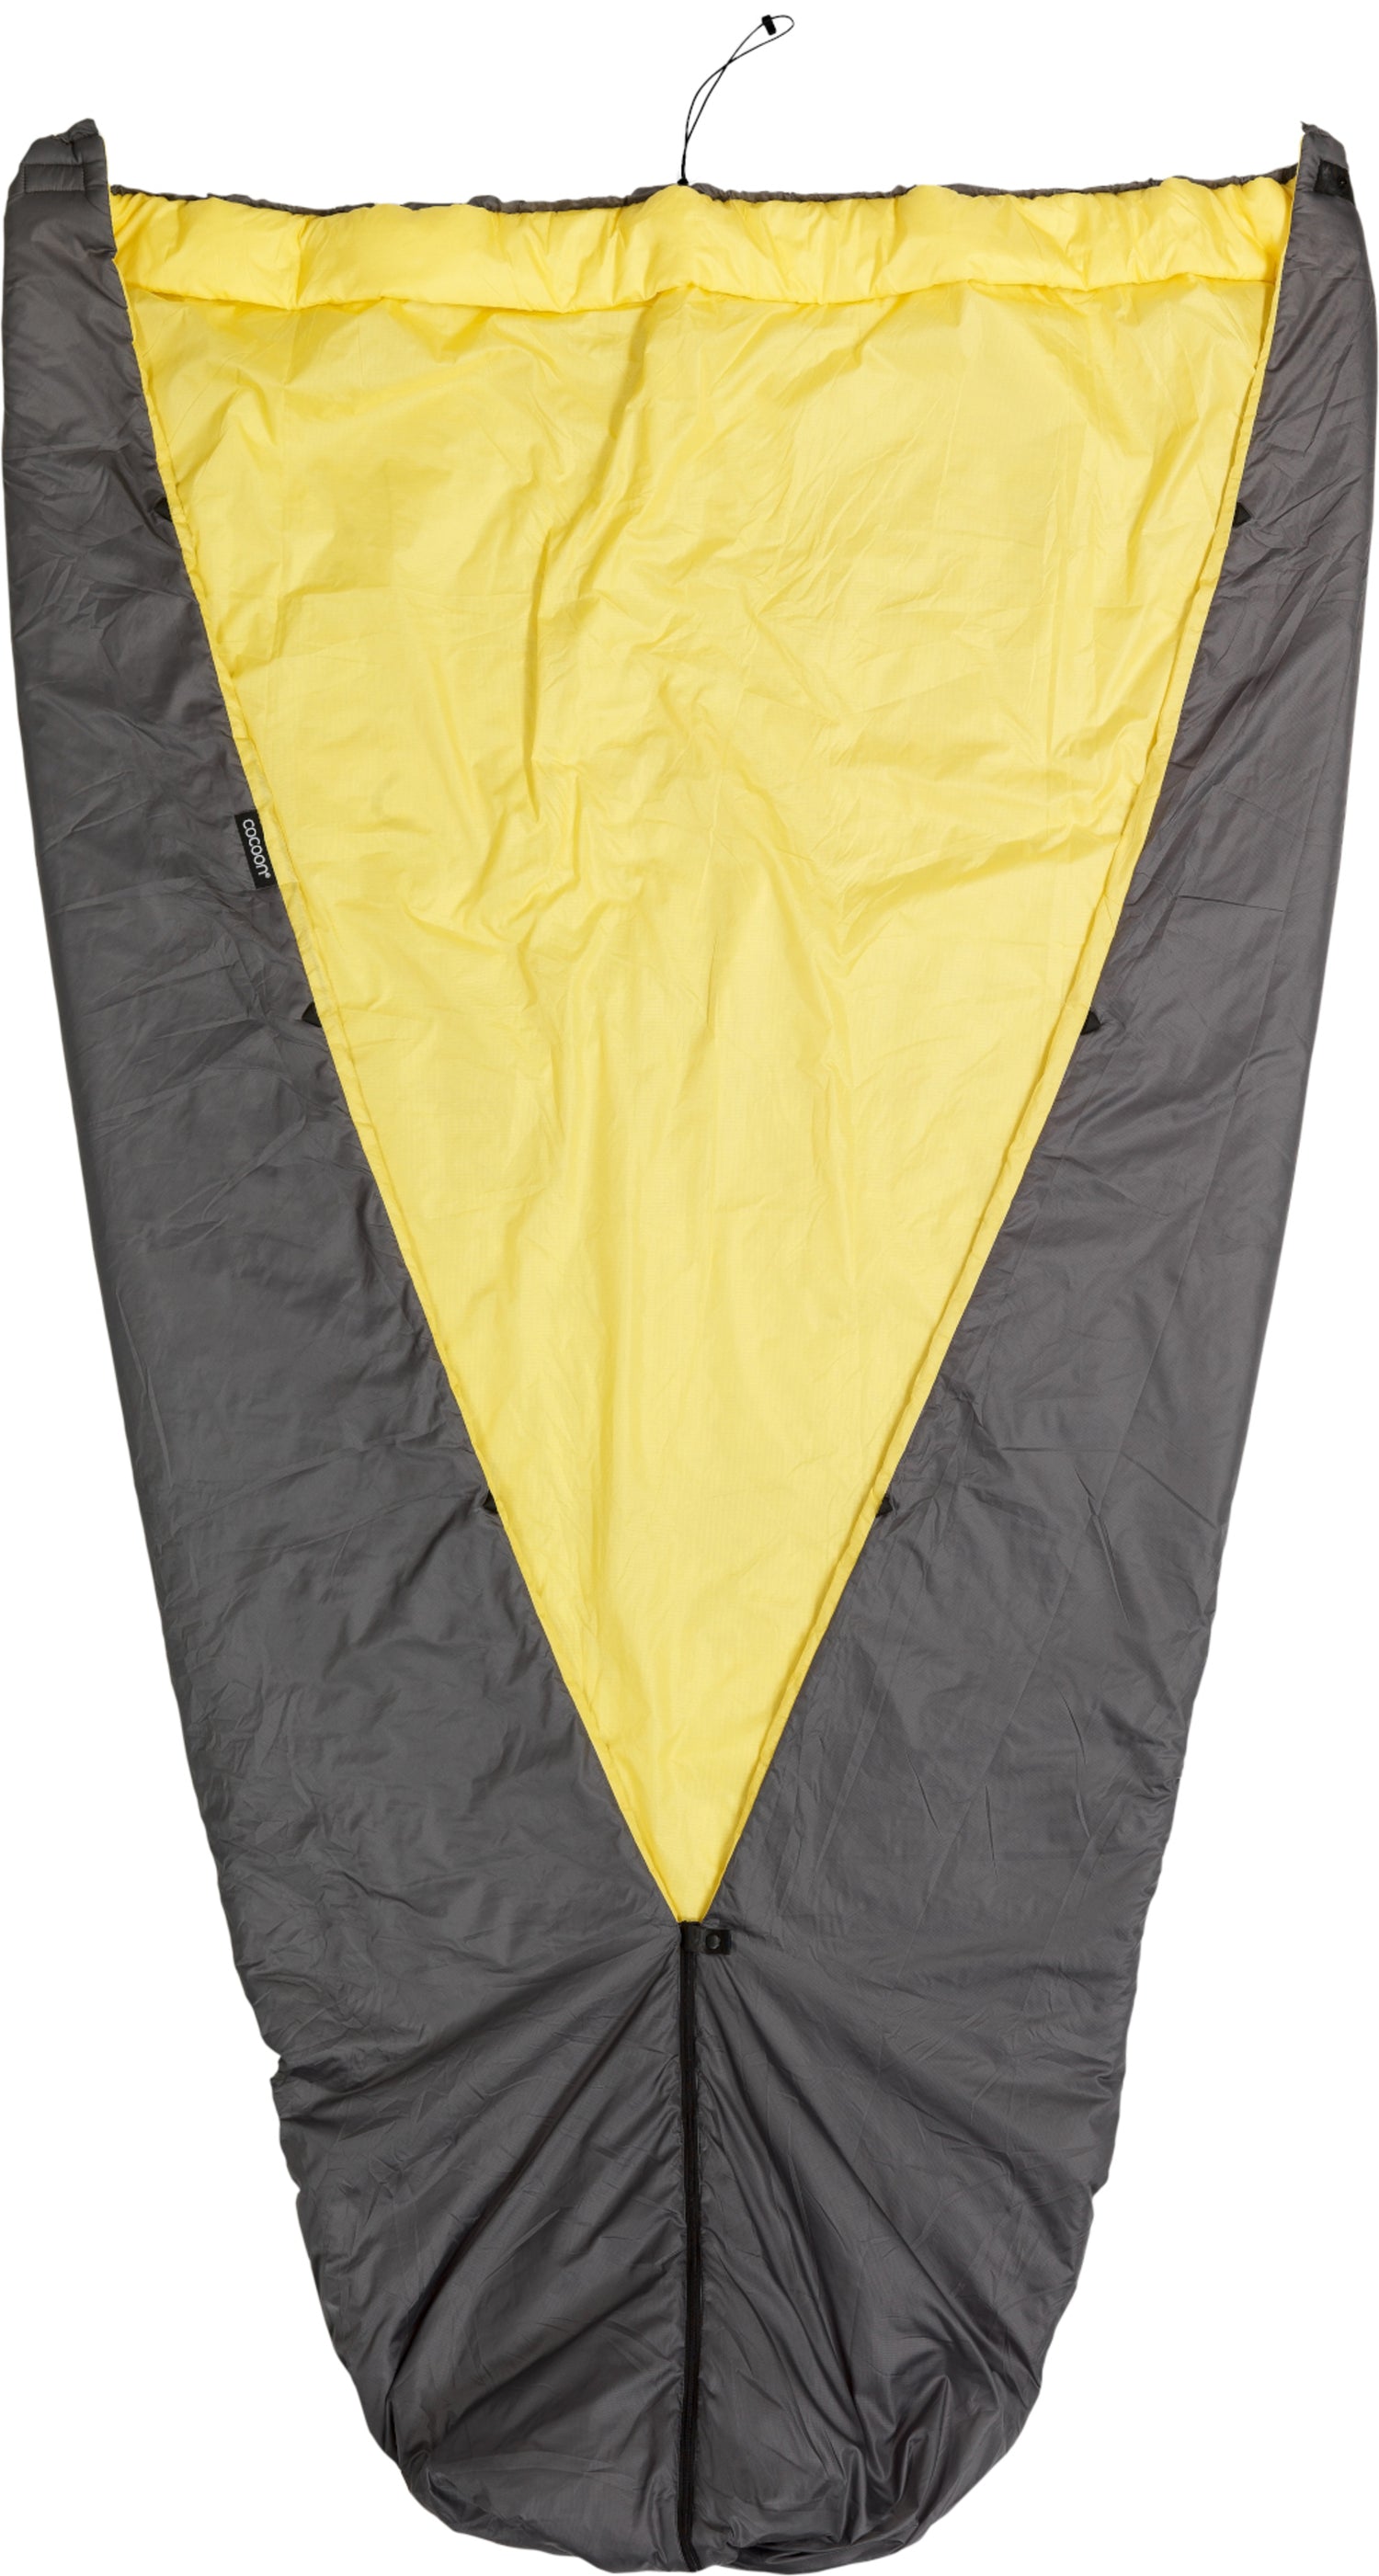 Cocoon Hammock Top Quilt shale / yellow sheen